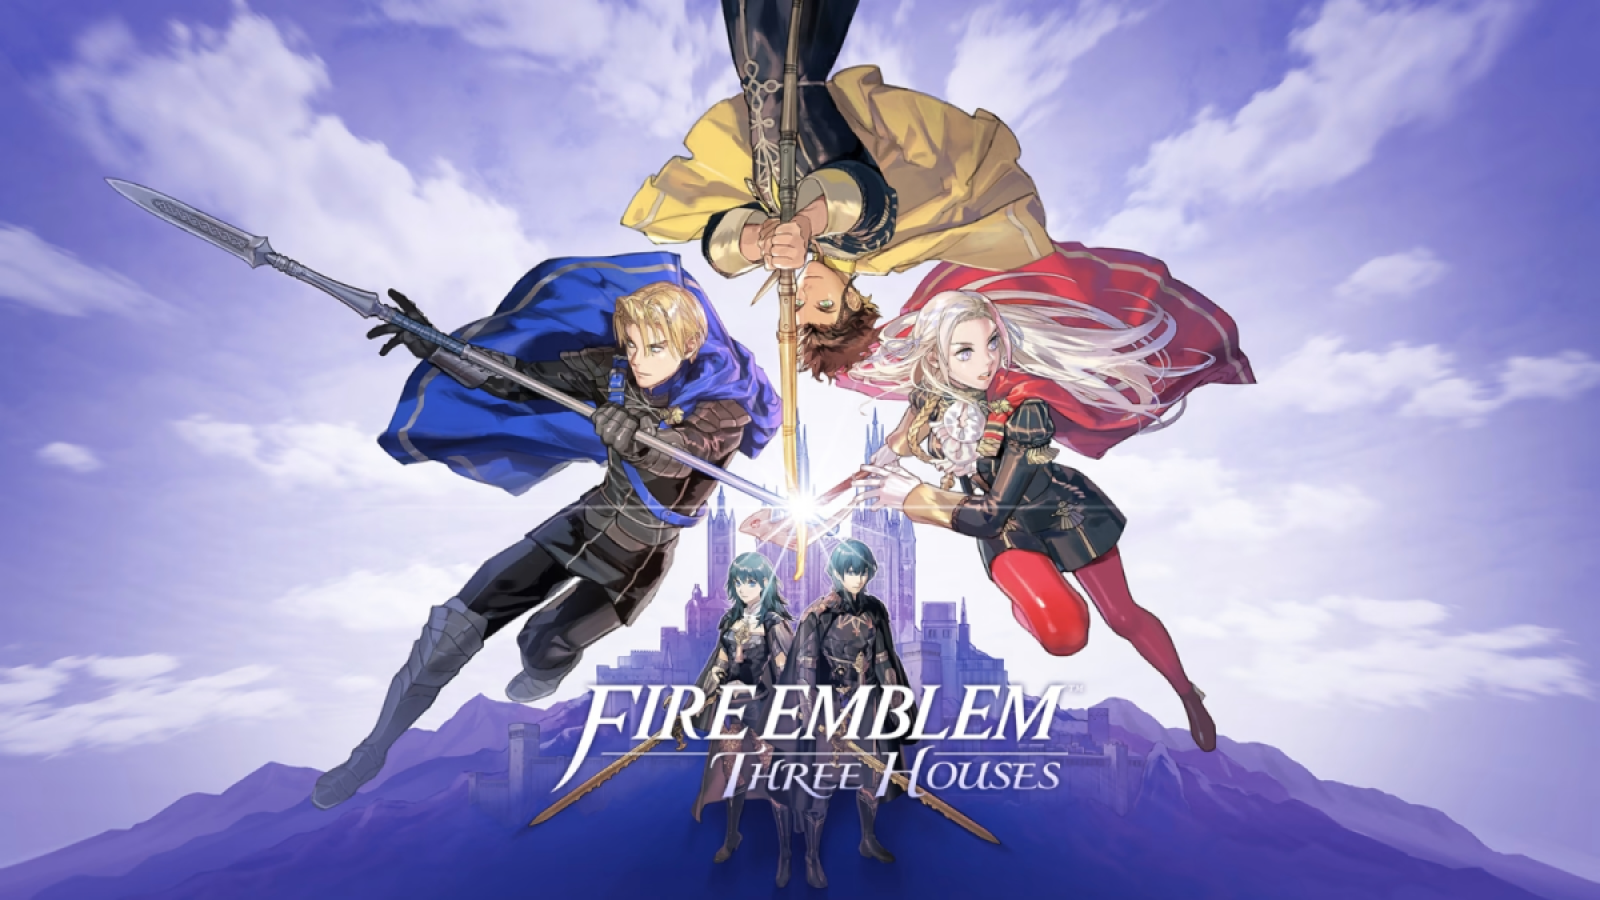 Fire Emblem: Three Houses characters in cover art